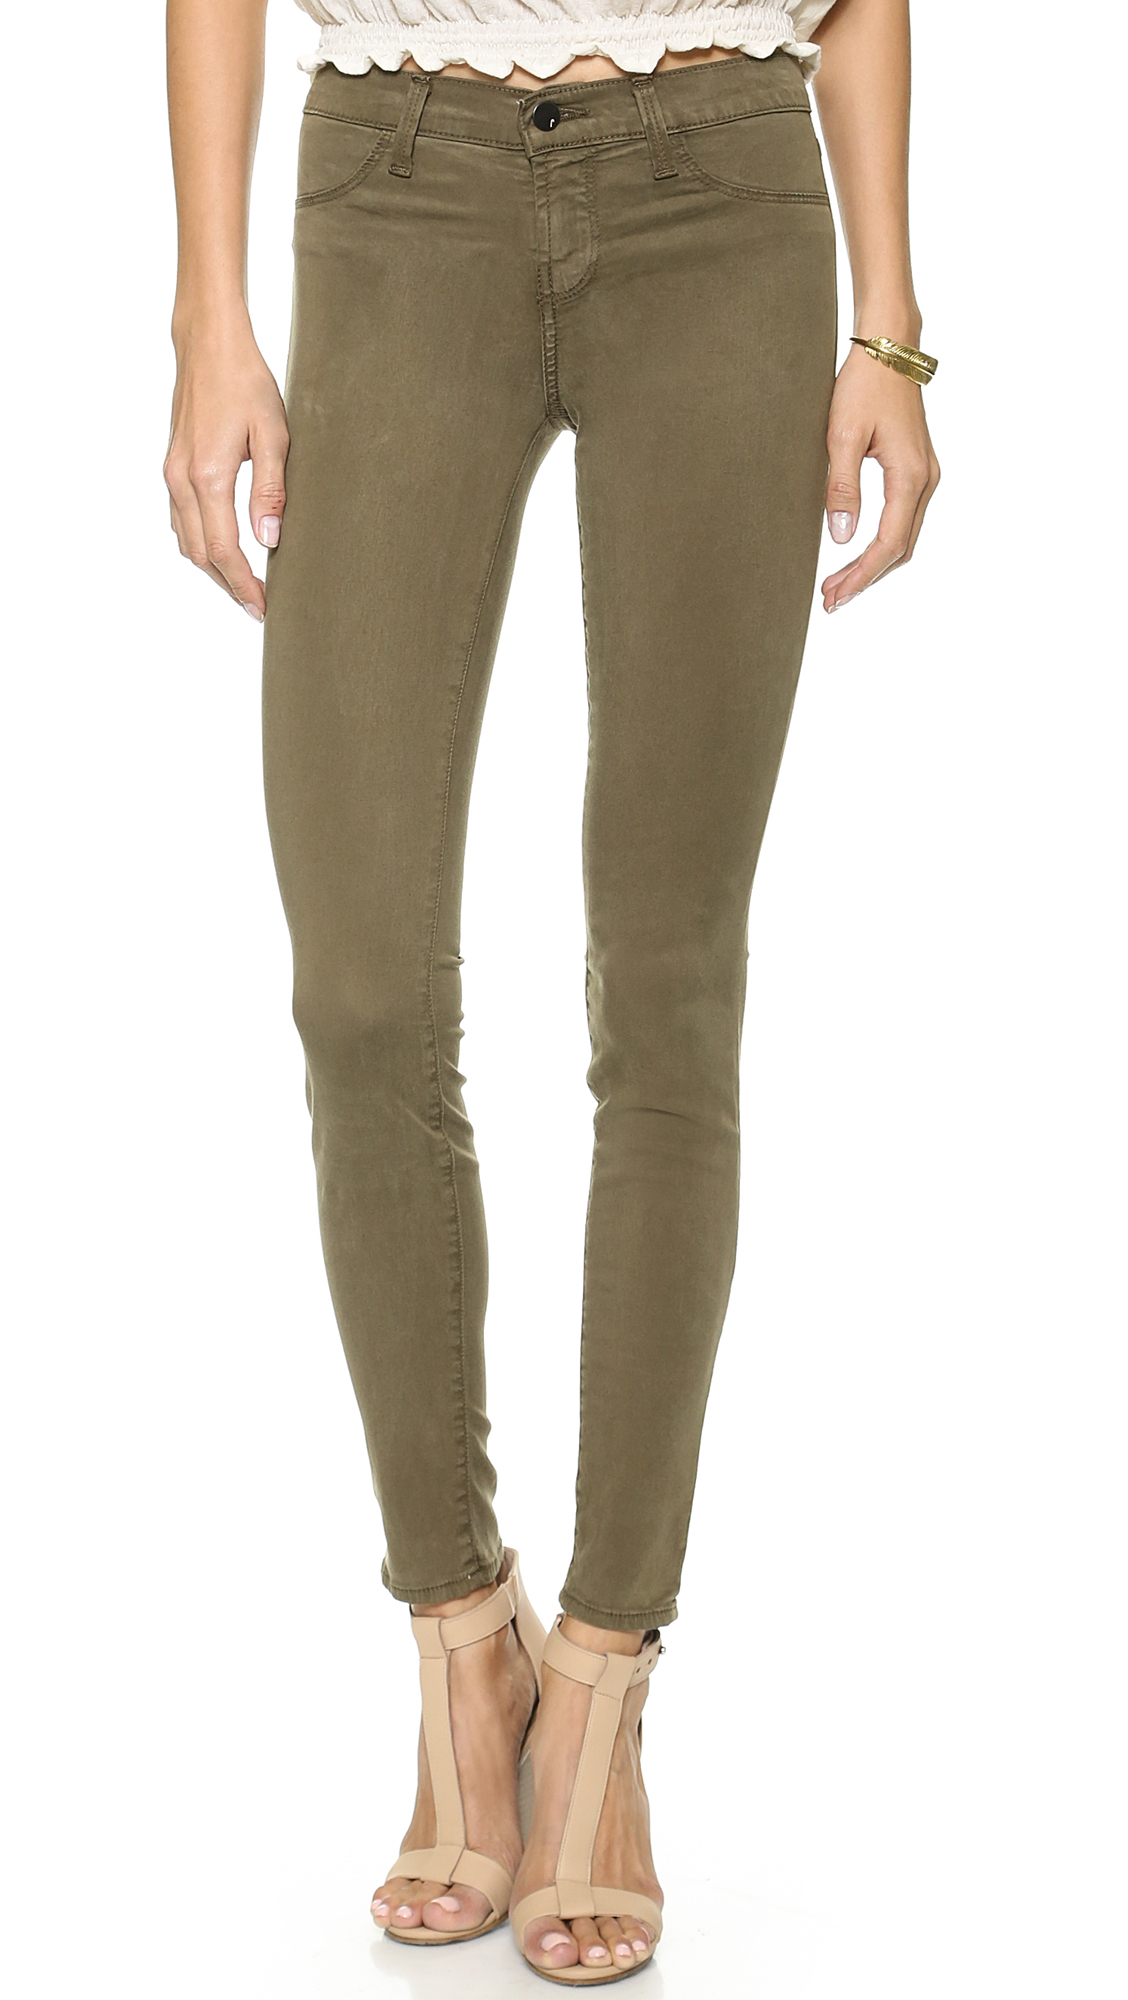 Lyst - J Brand 485 Mid Rise Super Skinny Jeans in Green